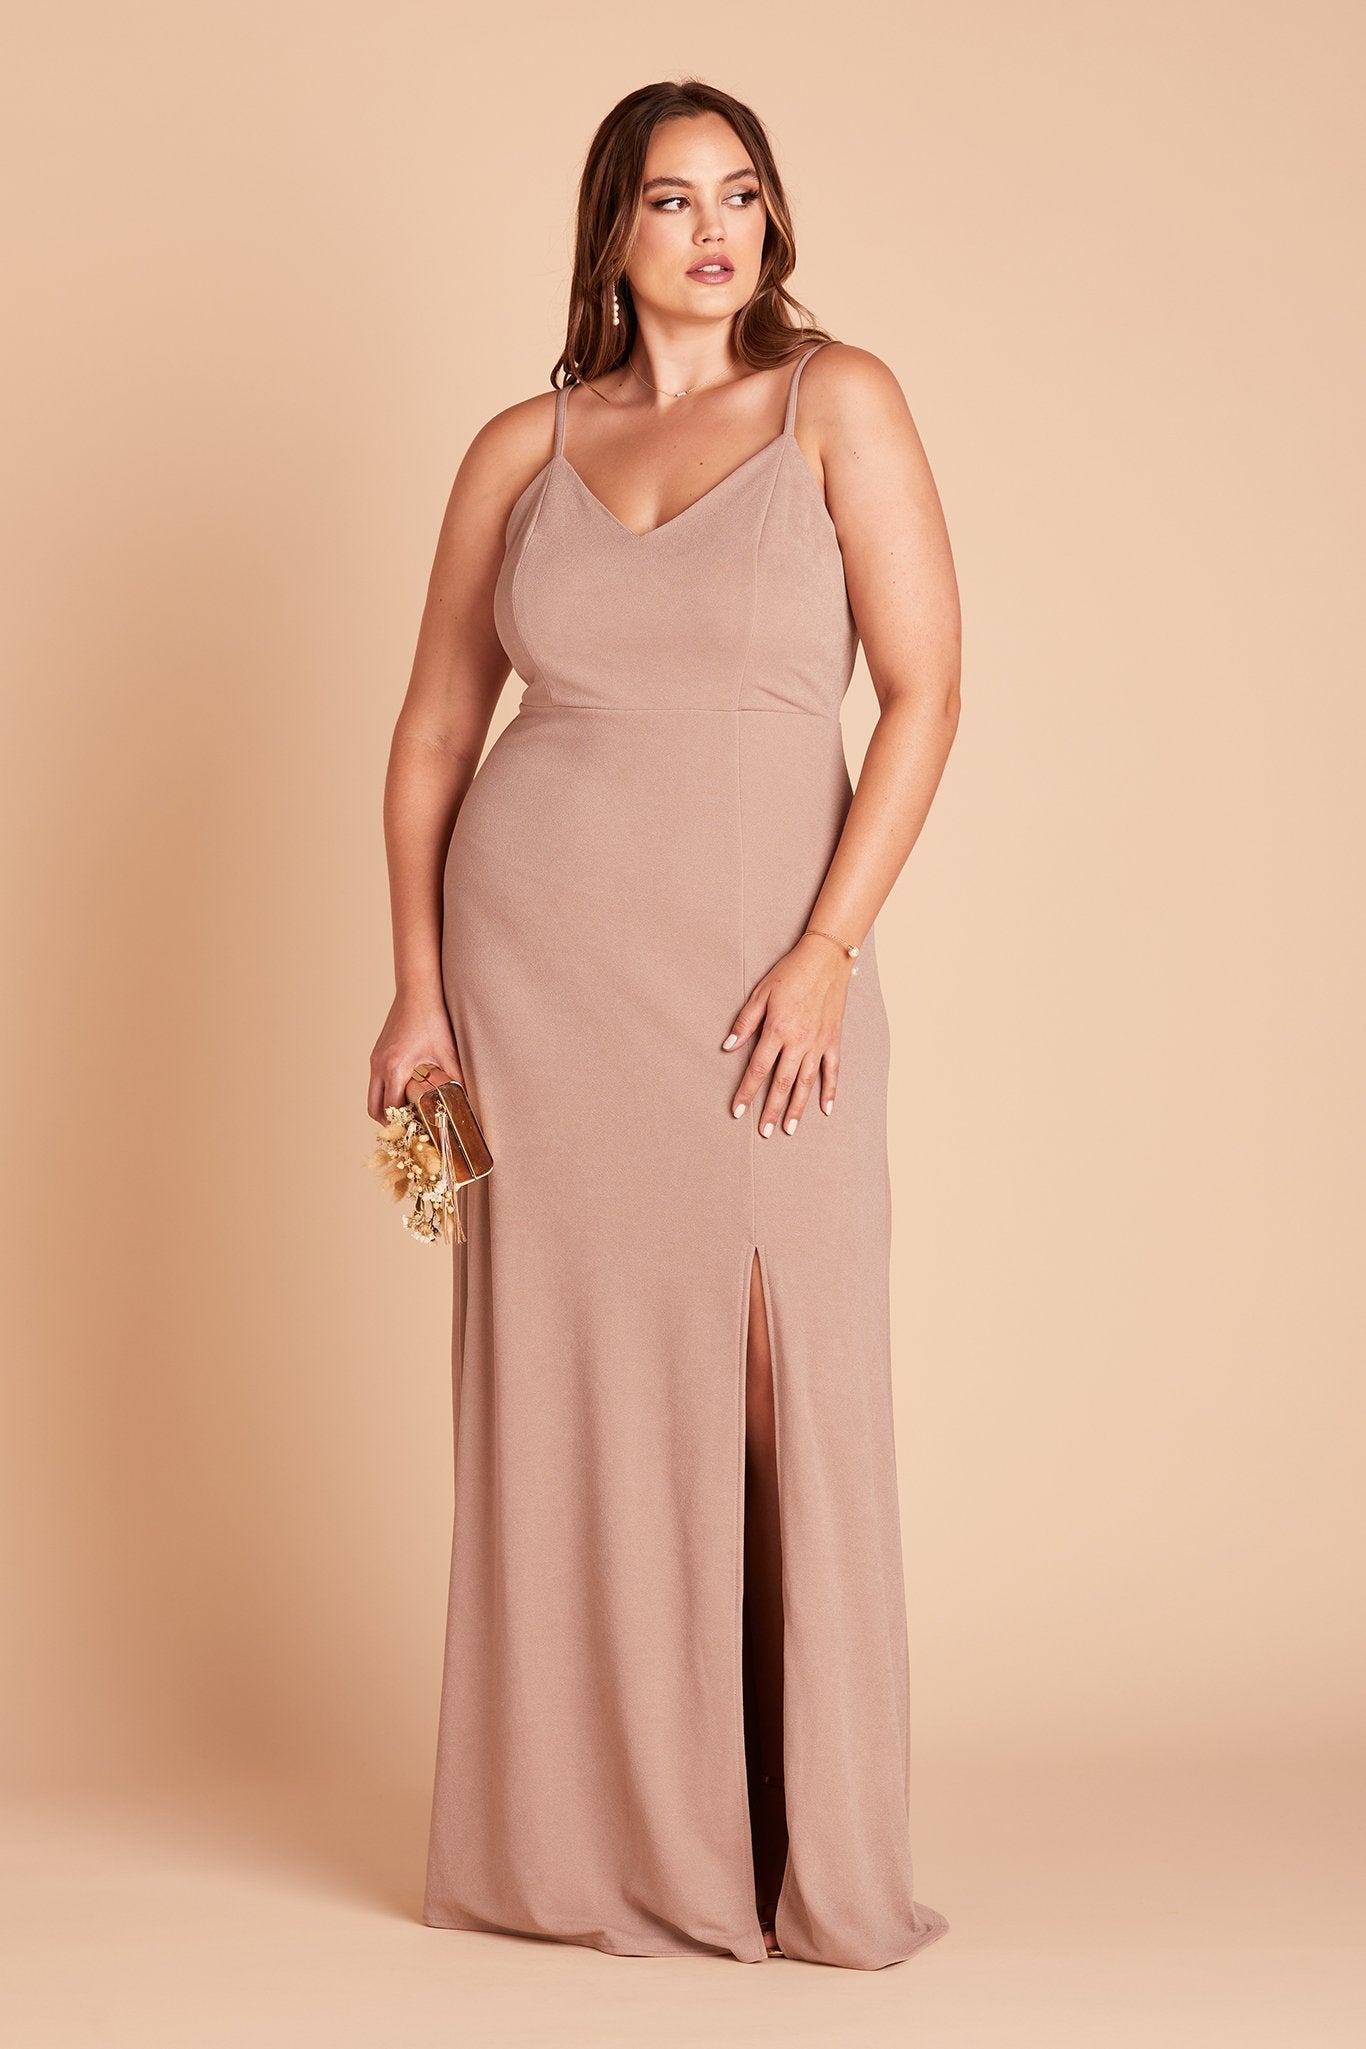 Jay plus size bridesmaid dress with slit in taupe crepe by Birdy Grey, front view